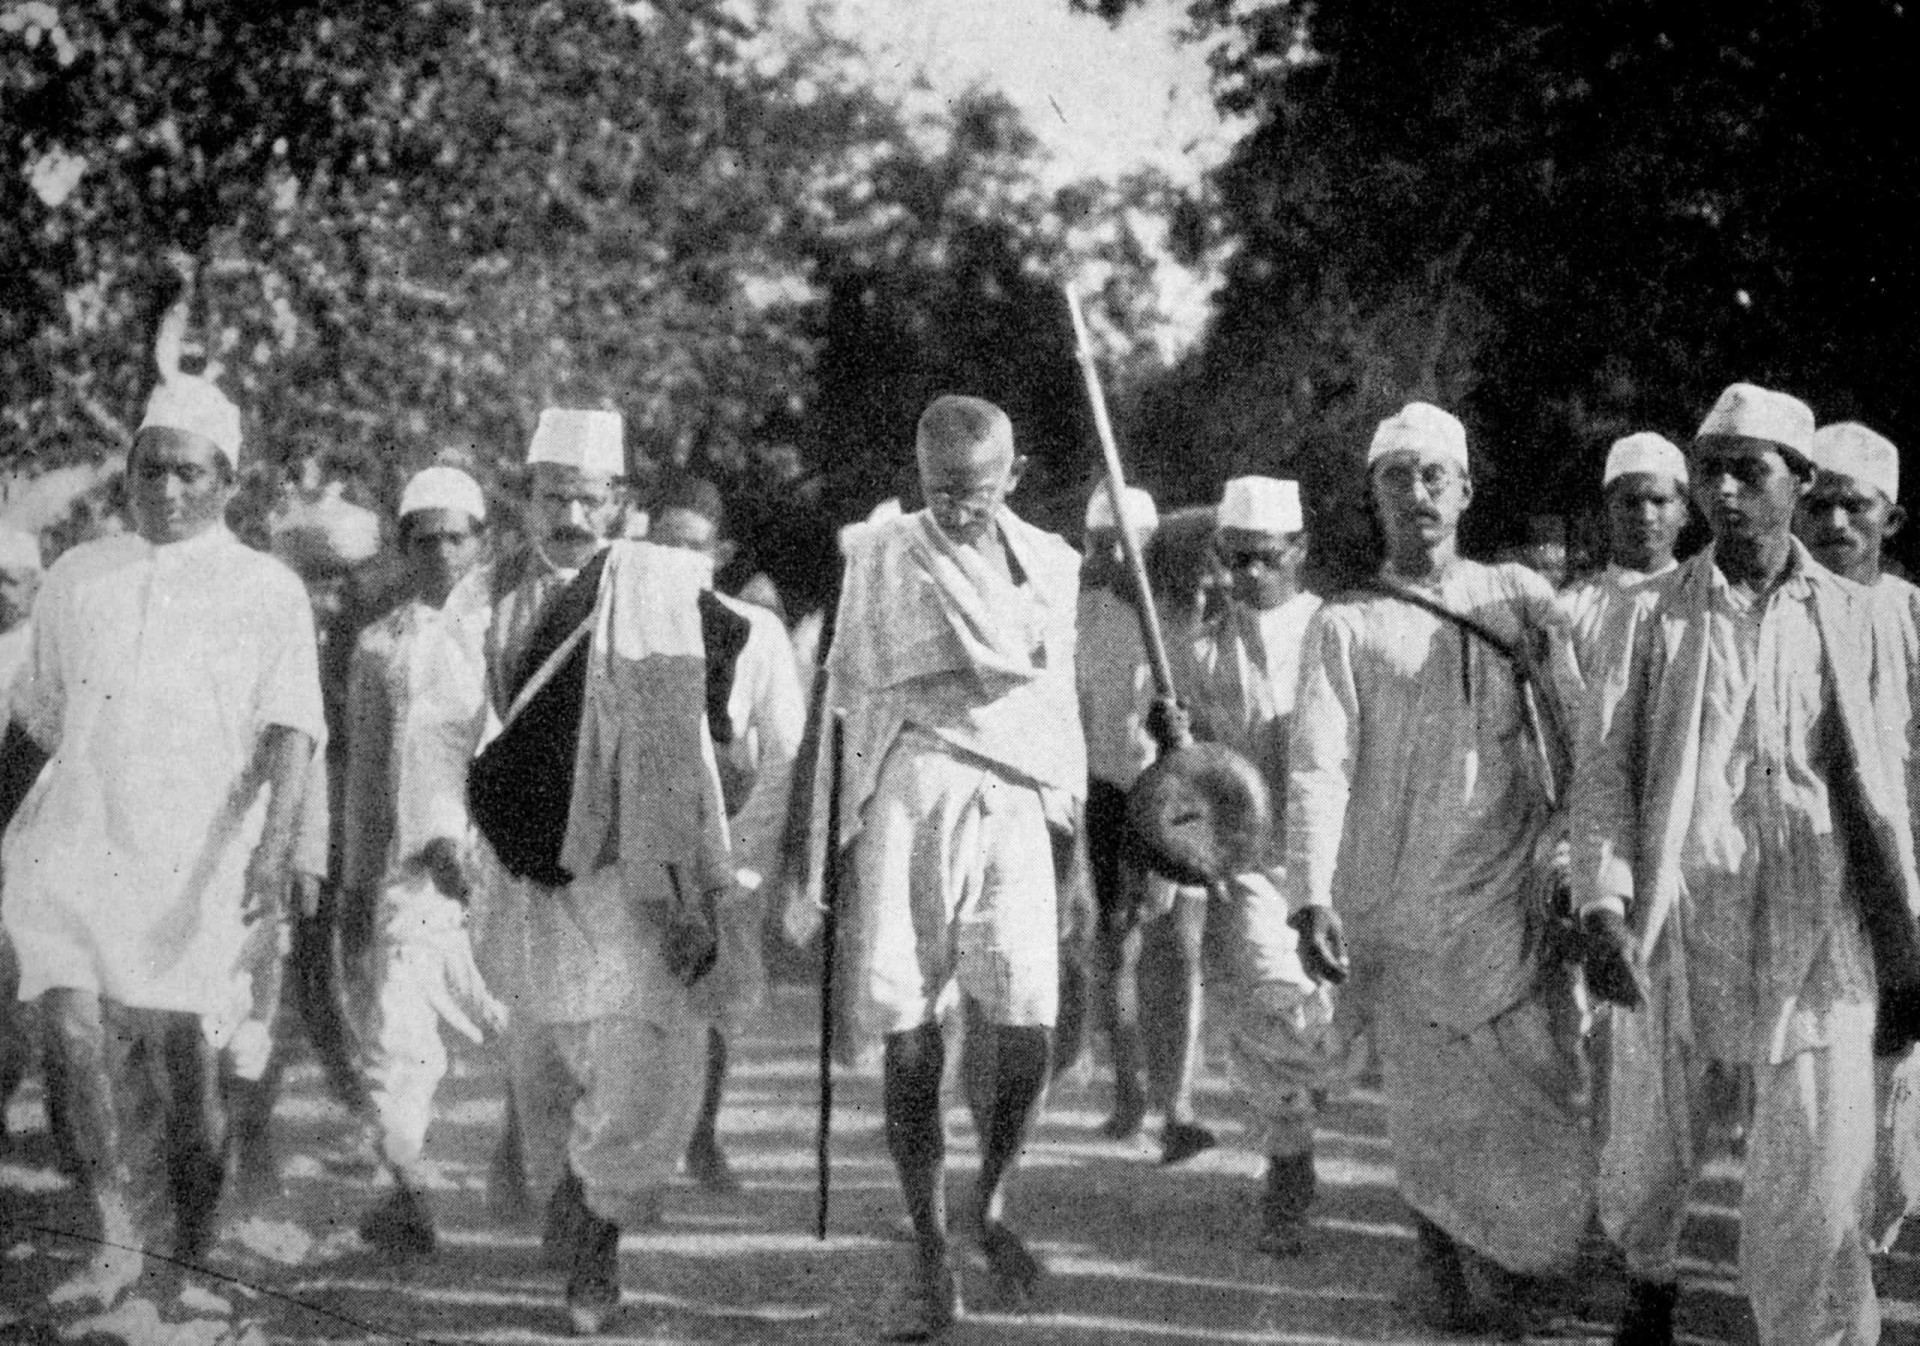 <p>From March 12 to April 6, 1930, Gandhi, together with 78 volunteers, marched 388 km (241 miles) from Ahmedabad to Dandi, Gujarat, in protest at the tax of salt imposed by the British earlier that year. His intention was to start making salt himself. </p><p><a href="https://www.msn.com/en-us/community/channel/vid-7xx8mnucu55yw63we9va2gwr7uihbxwc68fxqp25x6tg4ftibpra?cvid=94631541bc0f4f89bfd59158d696ad7e">Follow us and access great exclusive content every day</a></p>